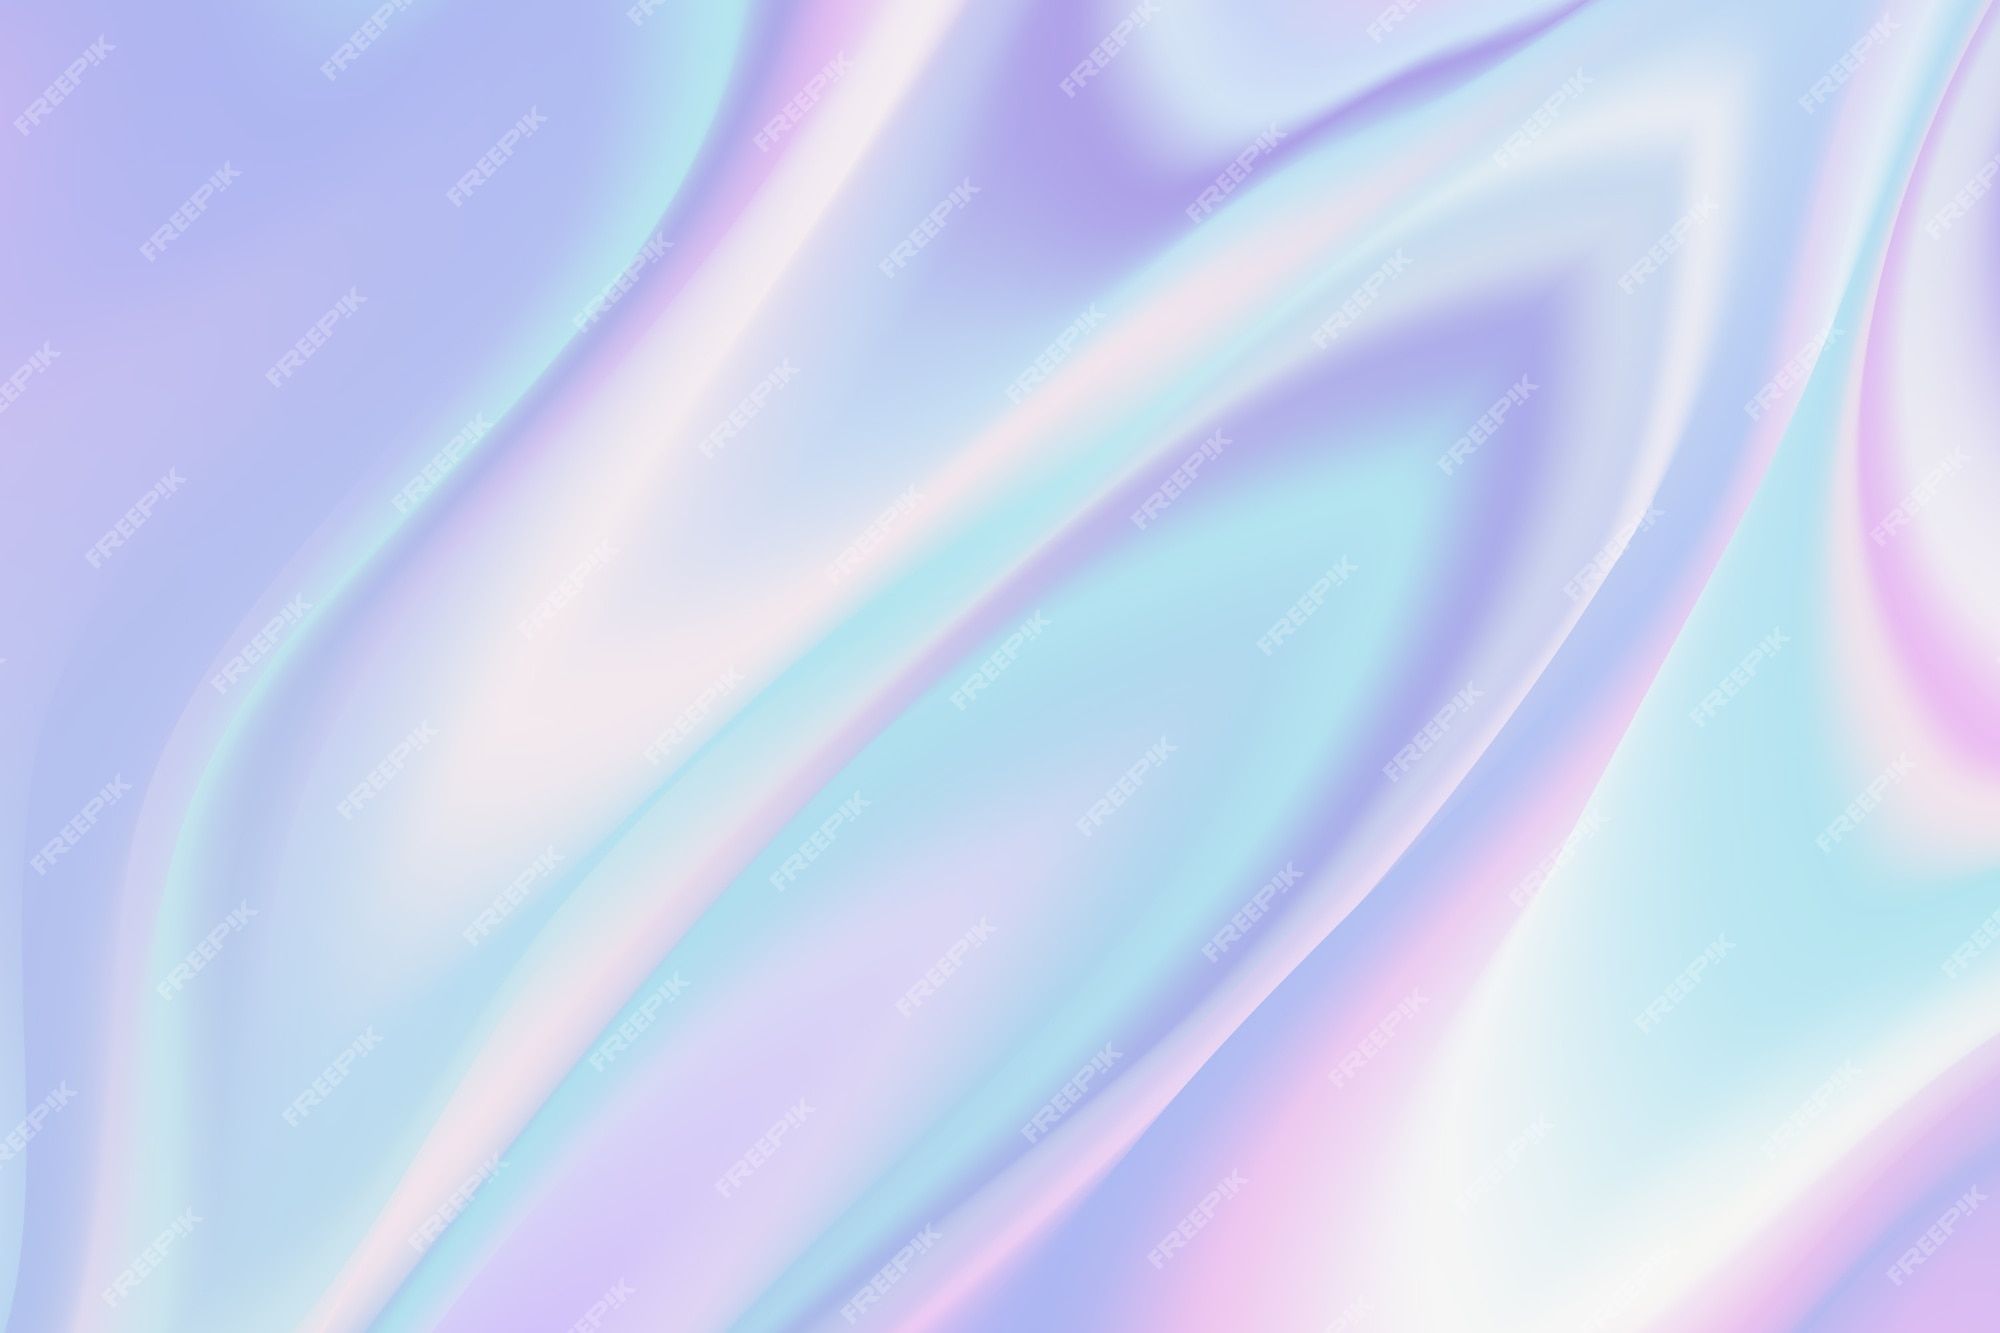 A pastel abstract background with flowing liquid textures - Holographic